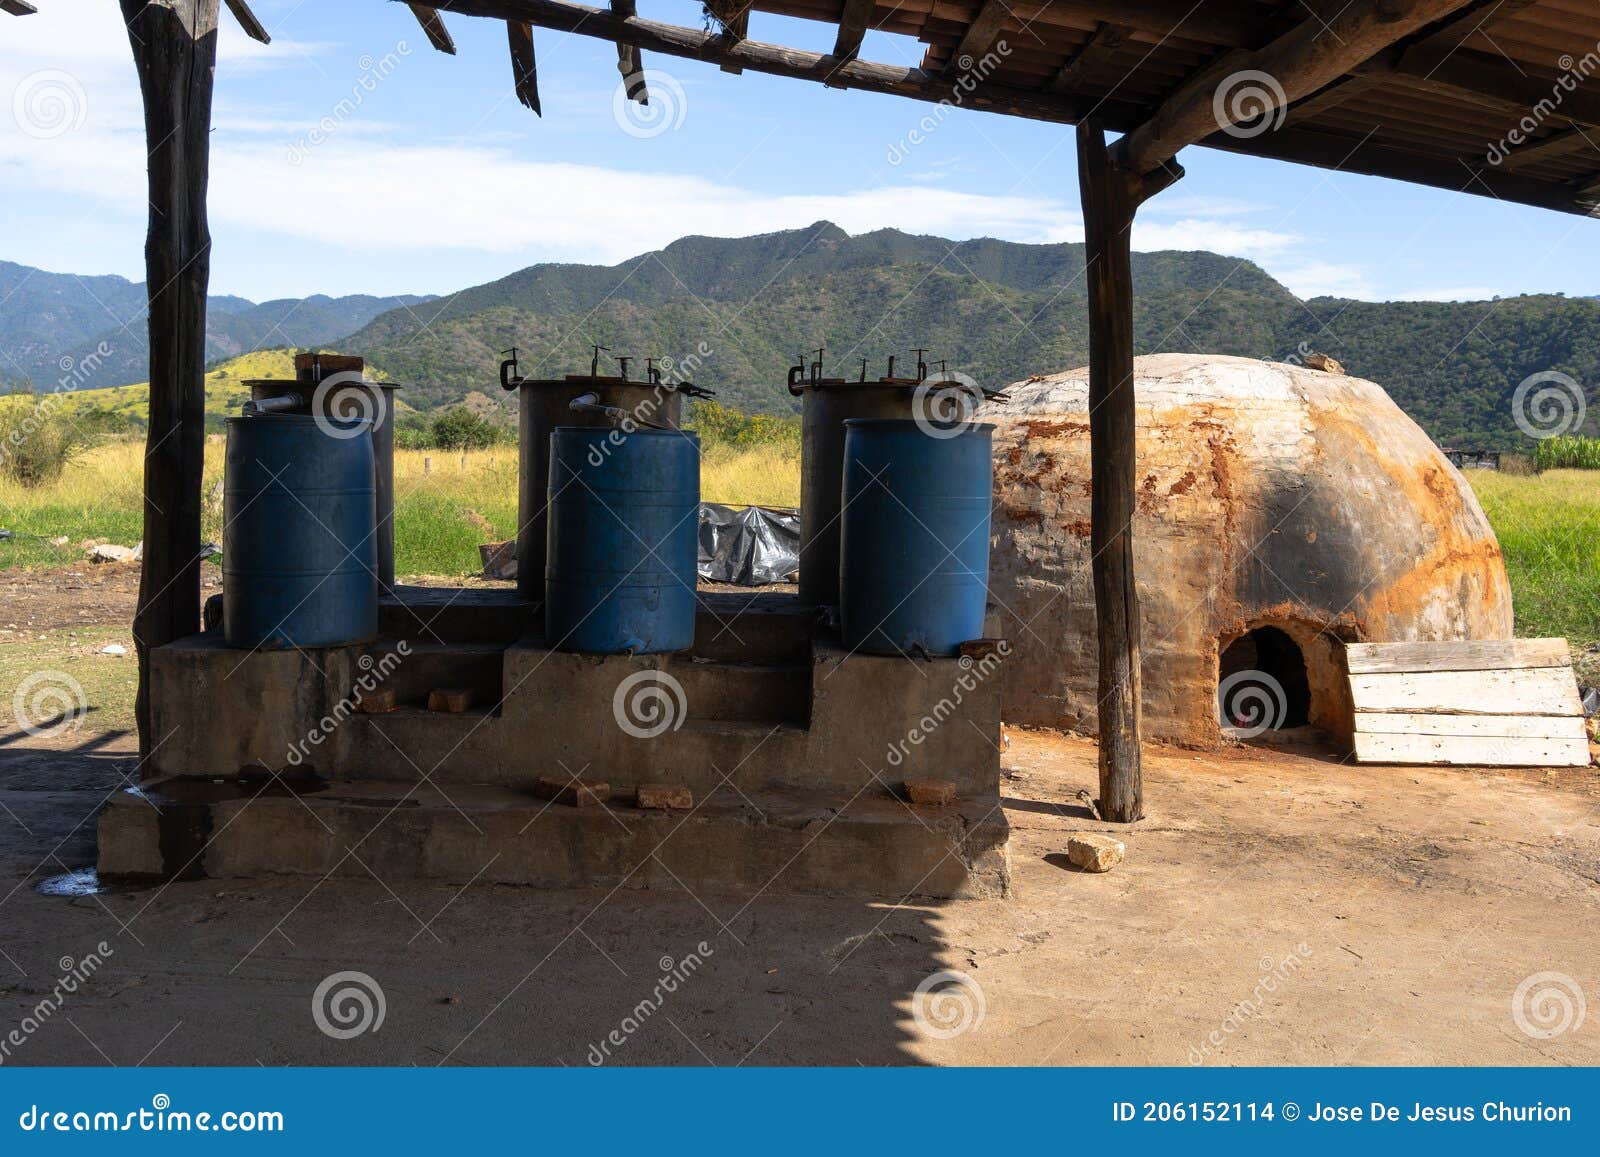 artisanal oven and fermentation equipment in the field to make tequila and raicilla.